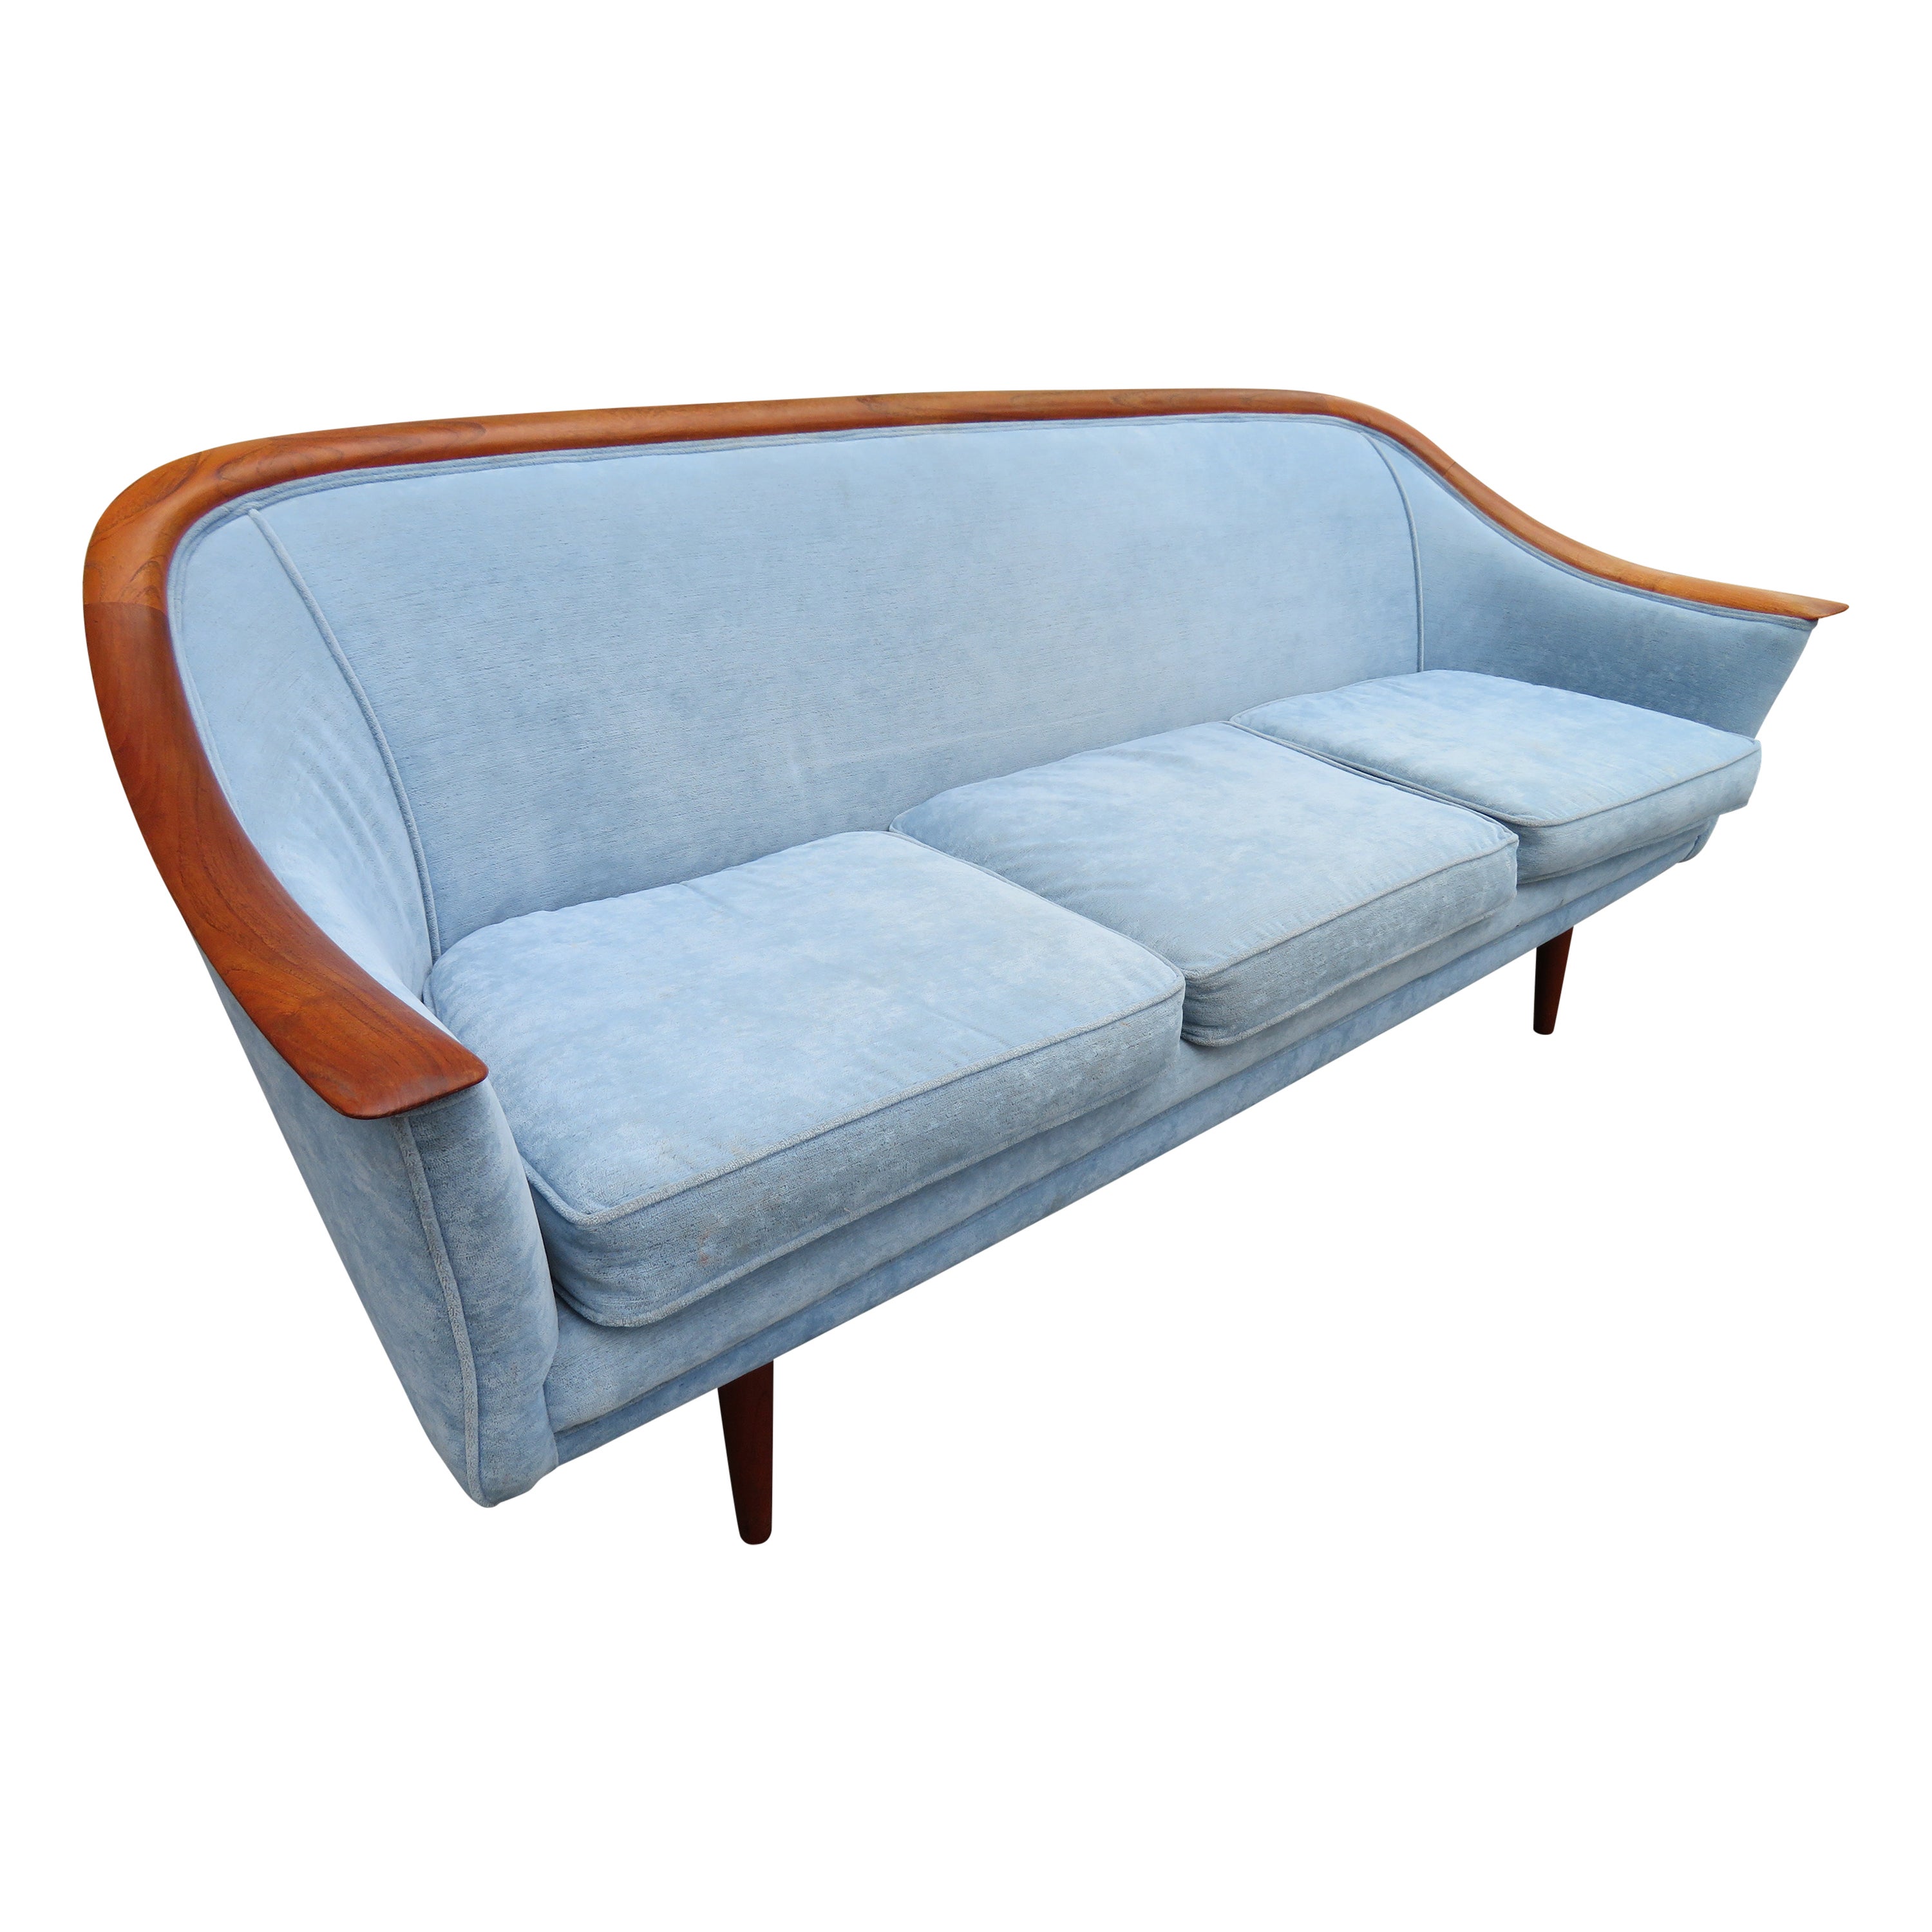 Exciting T. H. Robsjohn-Gibbing for Widdicomb Curved Sculptured Wood Edge Sofa